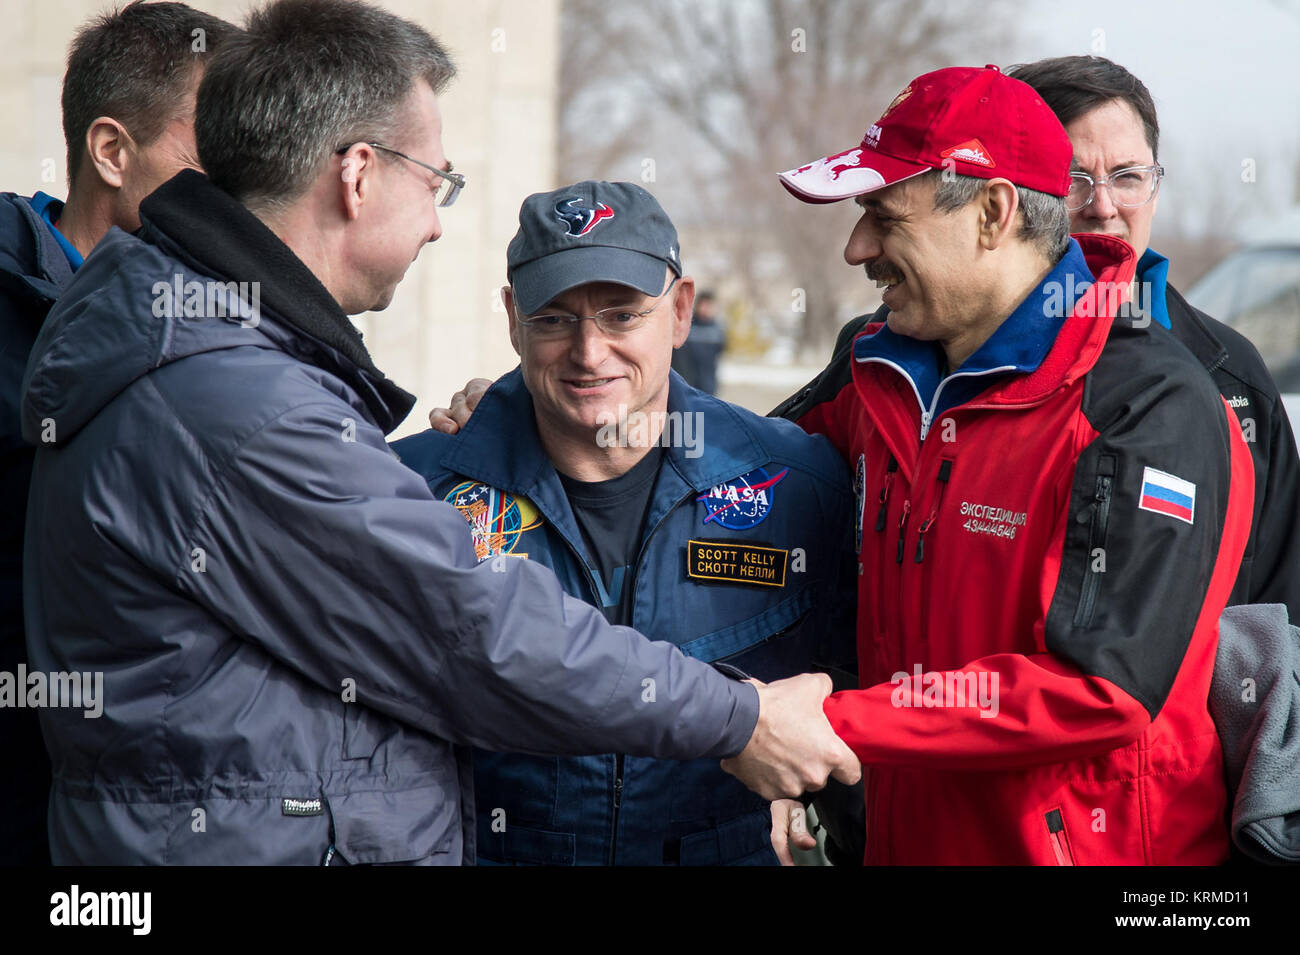 Expedition 46 Commander Scott Kelly of NASA, center, is embraced by Russian cosmonaut Mikhail Kornienko of Roscosmos, right, after the two arrived at the Zhezkazgan Airport in separate helicopters from the Soyuz TMA-18M spacecraft landing site on Wednesday, March 2, 2016 (Kazakh time). Kelly and Kornienko completed an International Space Station record year-long mission to collect valuable data on the effect of long duration weightlessness on the human body that will be used to formulate a human mission to Mars. Russian cosmonaut Sergey Volkov of Roscosmos returned after spending six months on Stock Photo